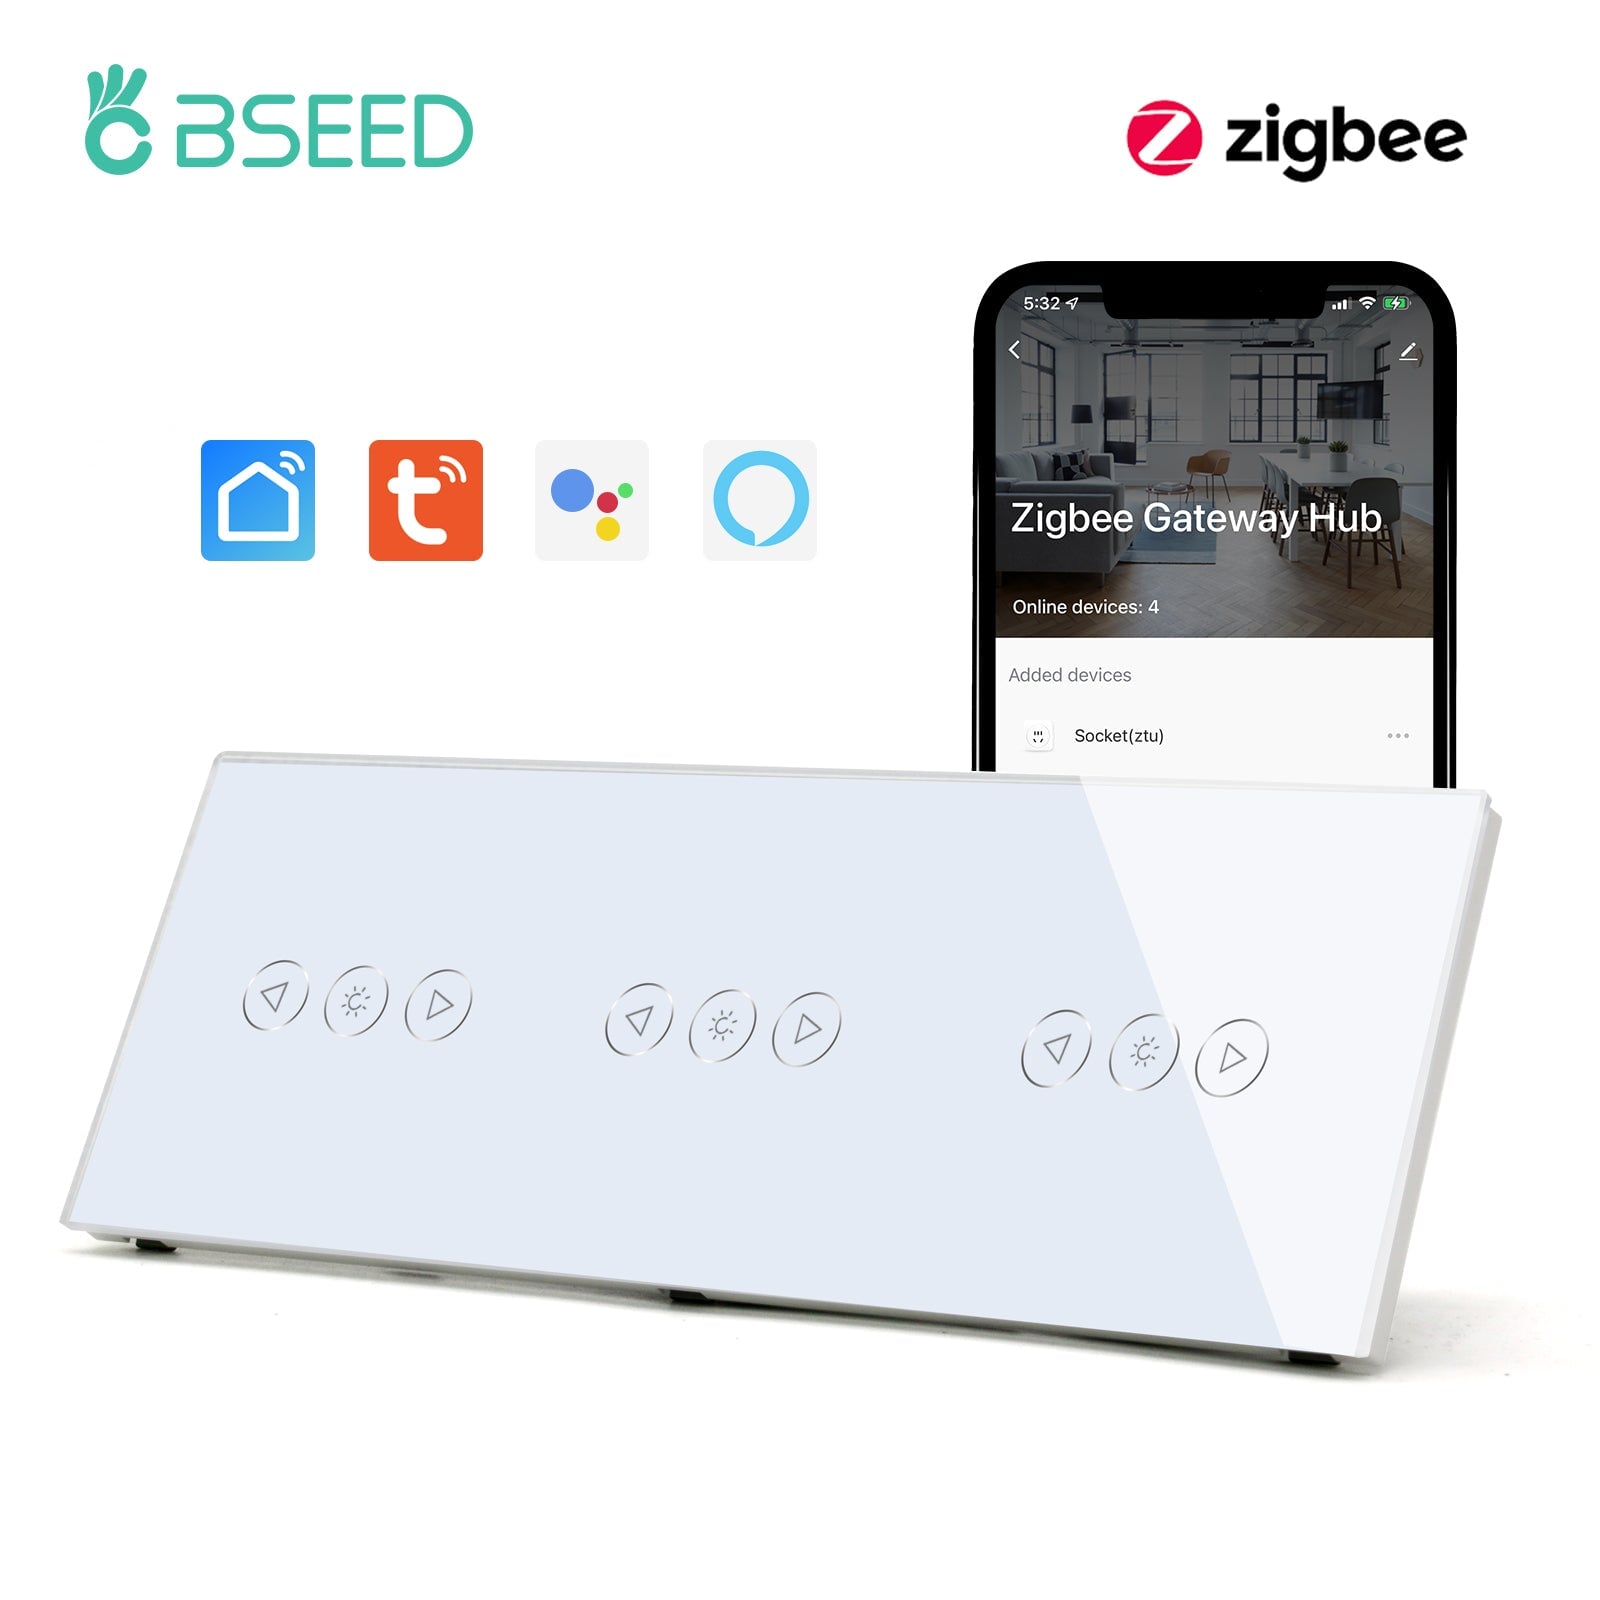 Bseed triple New Zigbee Touch Light Dimmer Smart Switch Light Switches Bseedswitch White 